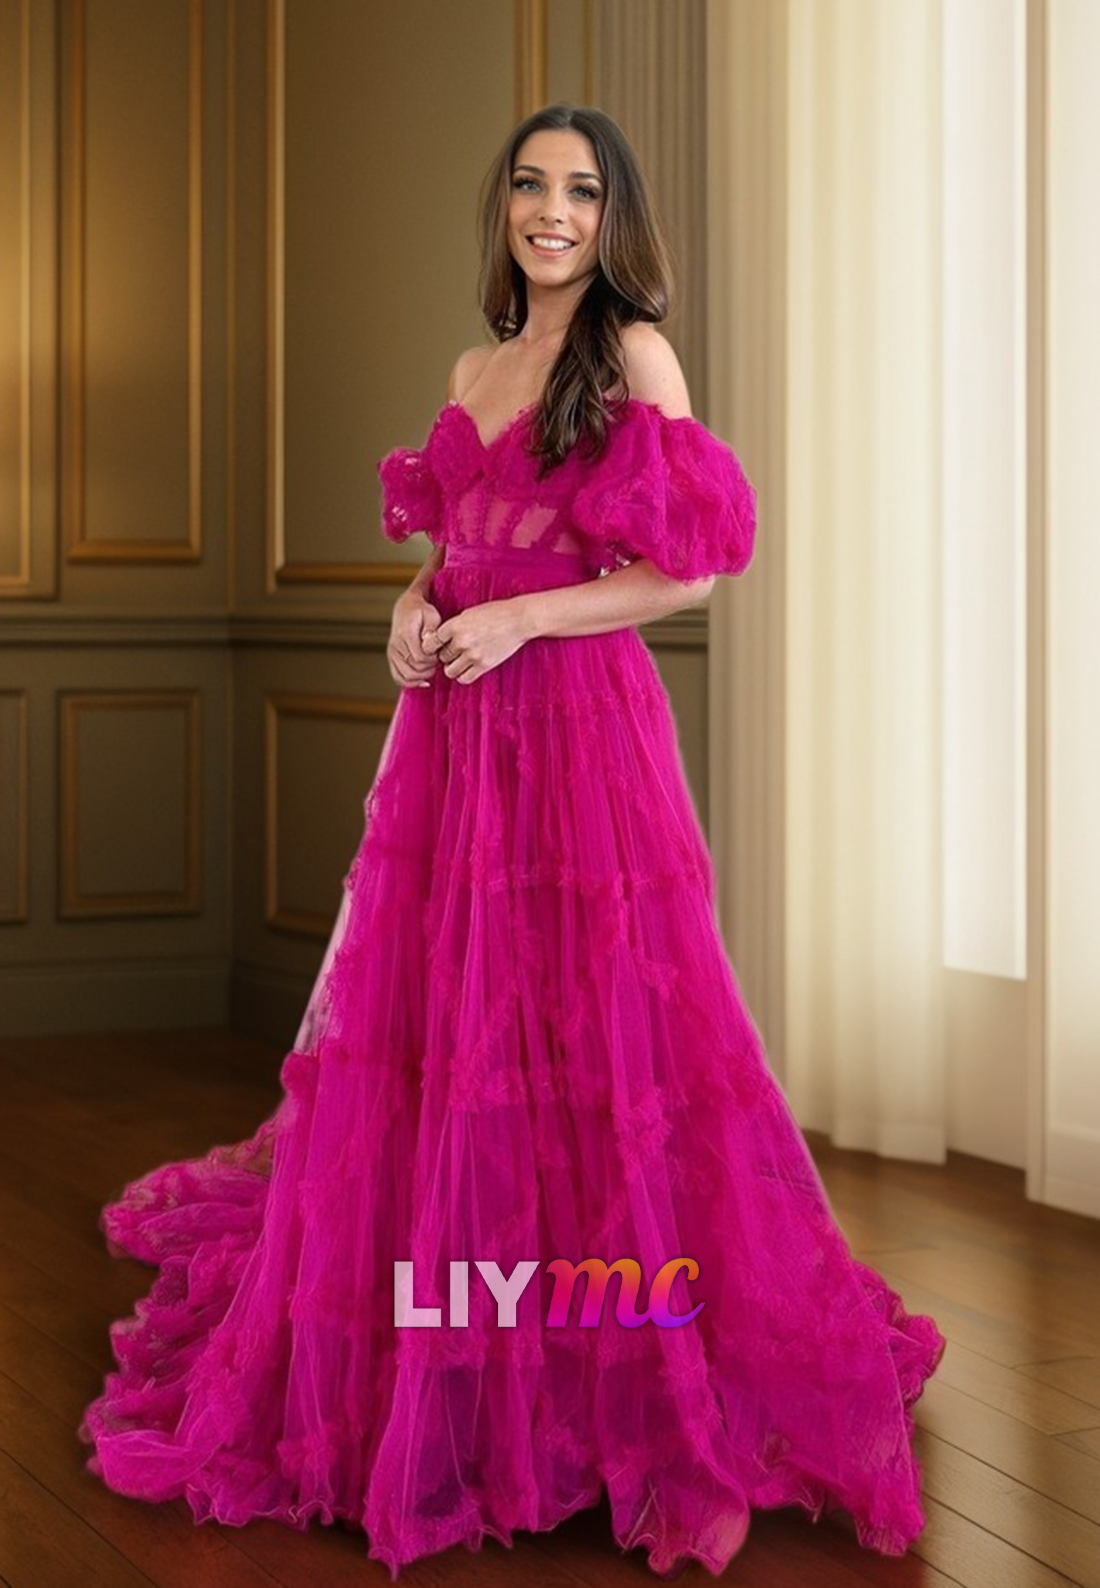 LP2313 - Sweetheart Puff Sleeves Sheer Appliques A-Line Prom Dress